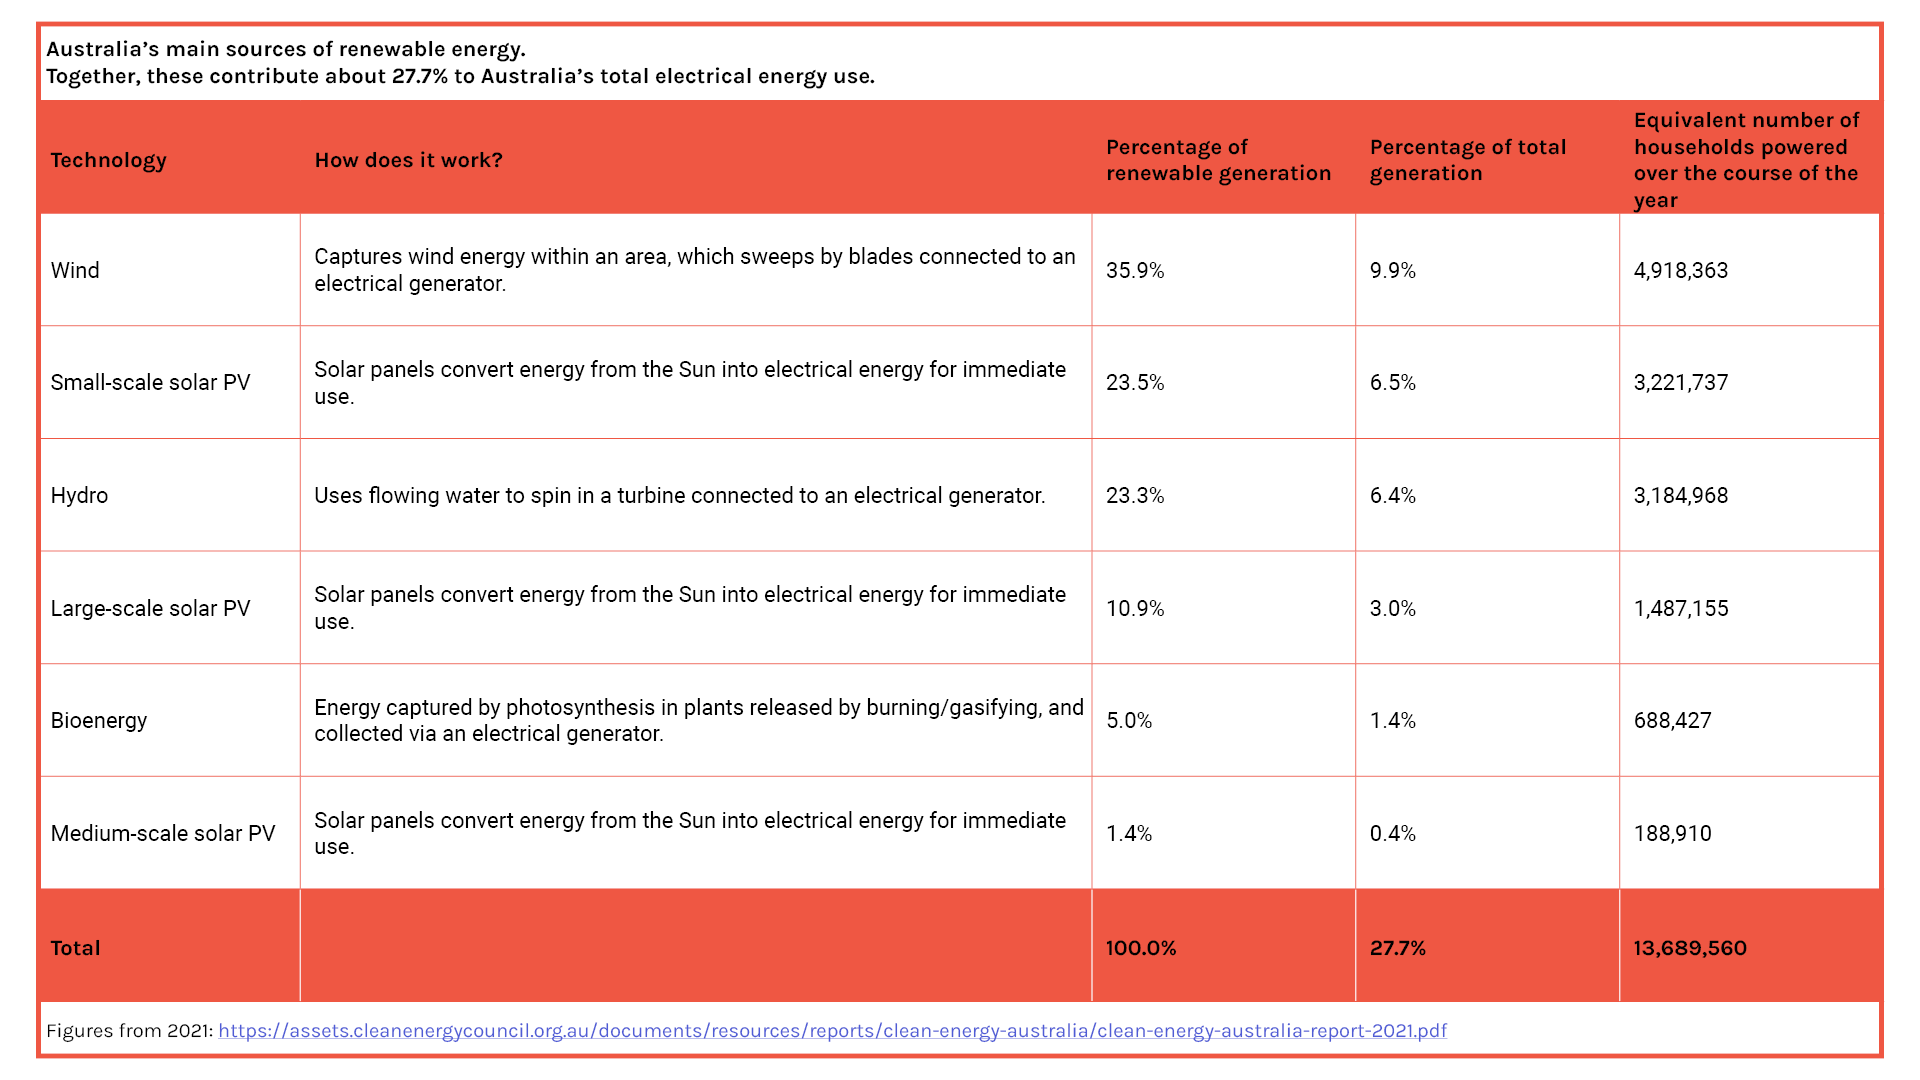 A table of the most popular sources of renewable energy in Australia